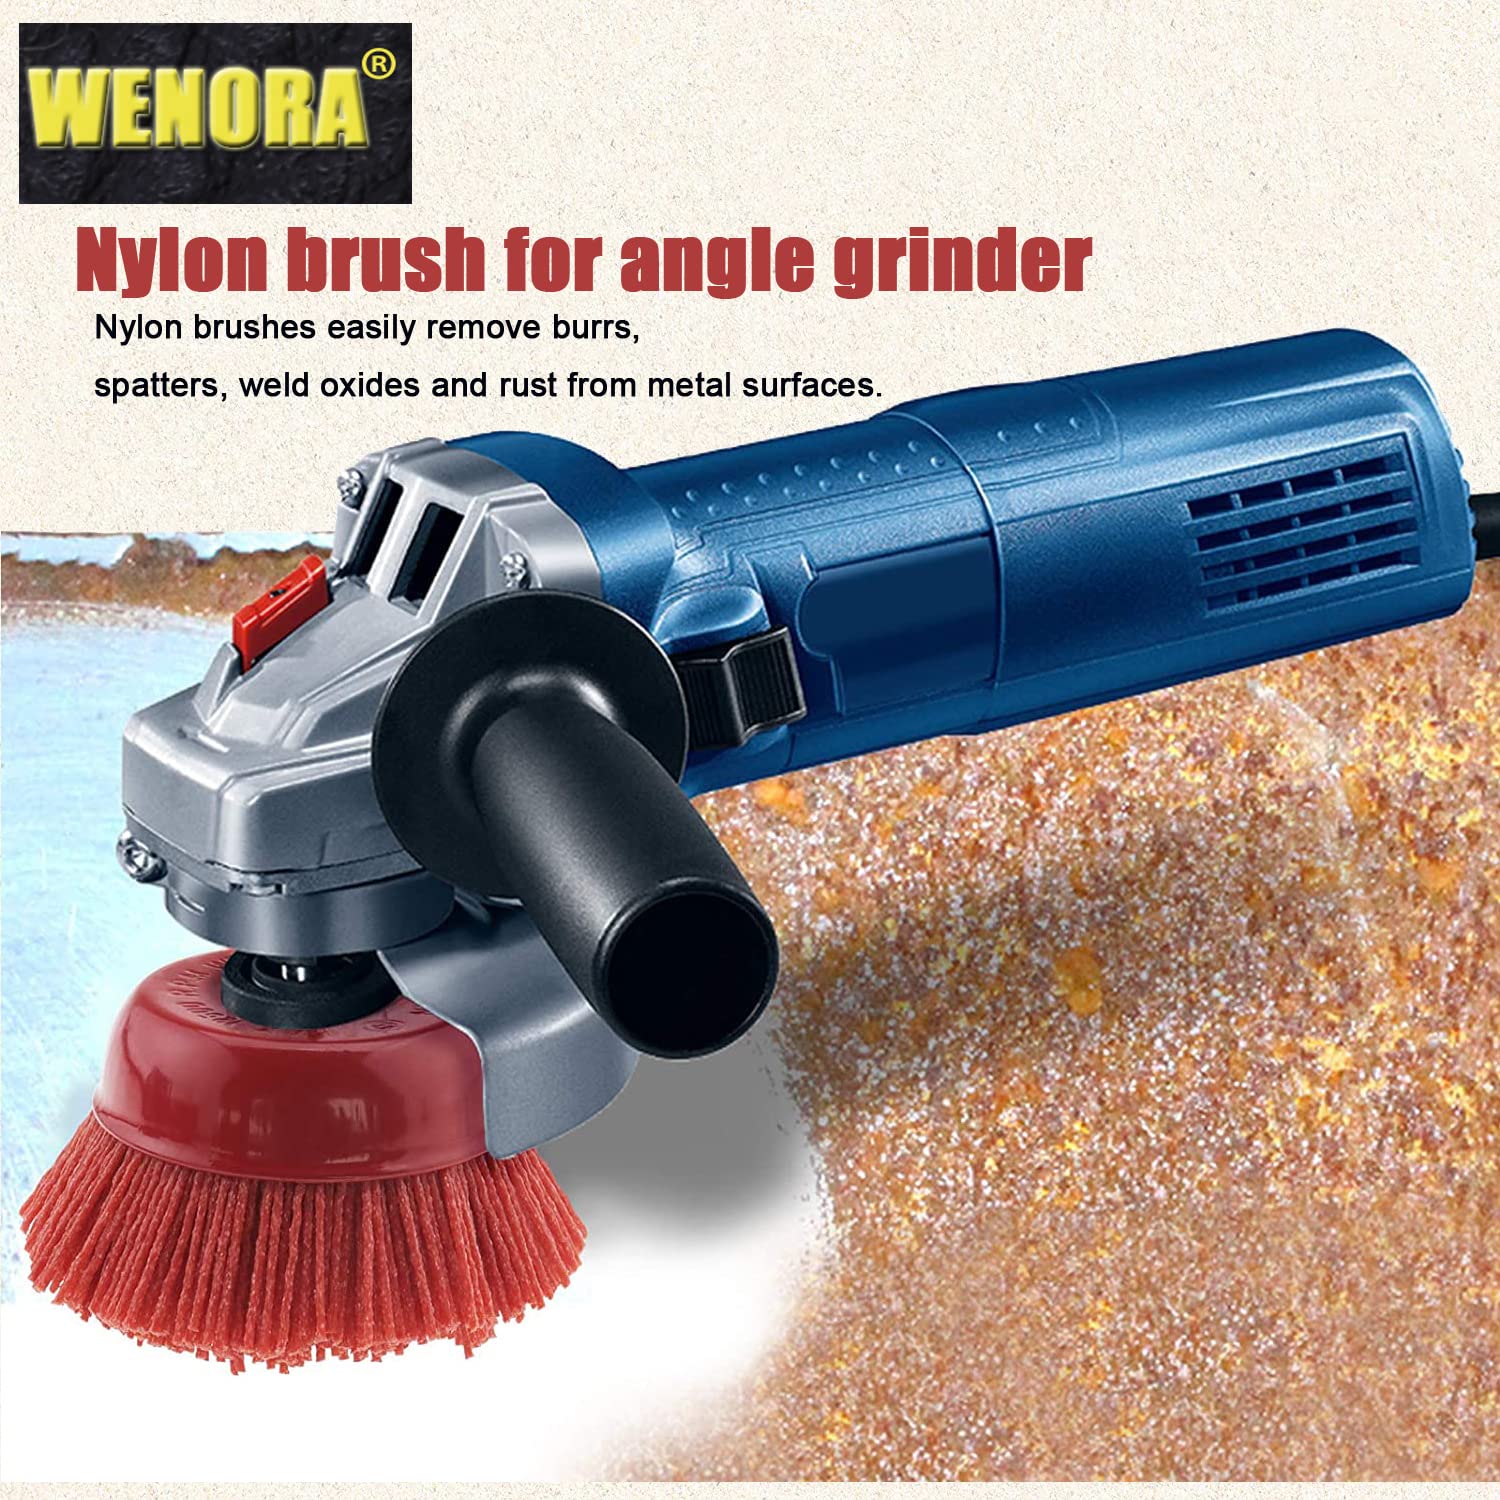 WENORA 4 Inch Nylon Cup Brush for Angle Grinder, Abrasive Filament Cup Brush, Nylon Wheel Brush for Grinder, 5/8" 11 Thread, 1/4" Drill Arbor